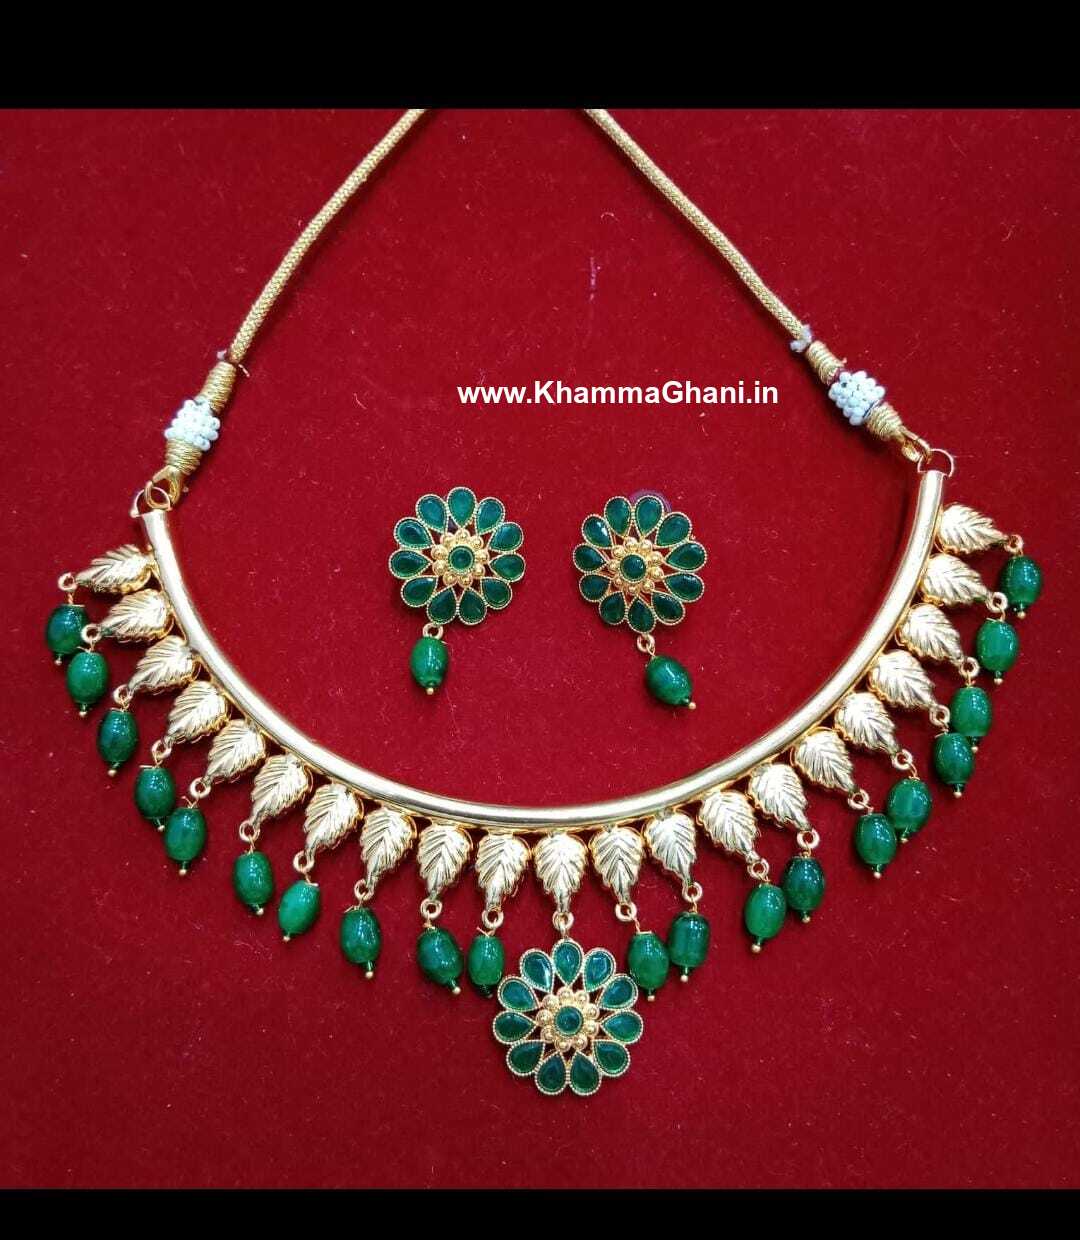 Rajasthani Hasli Necklace in Green Color